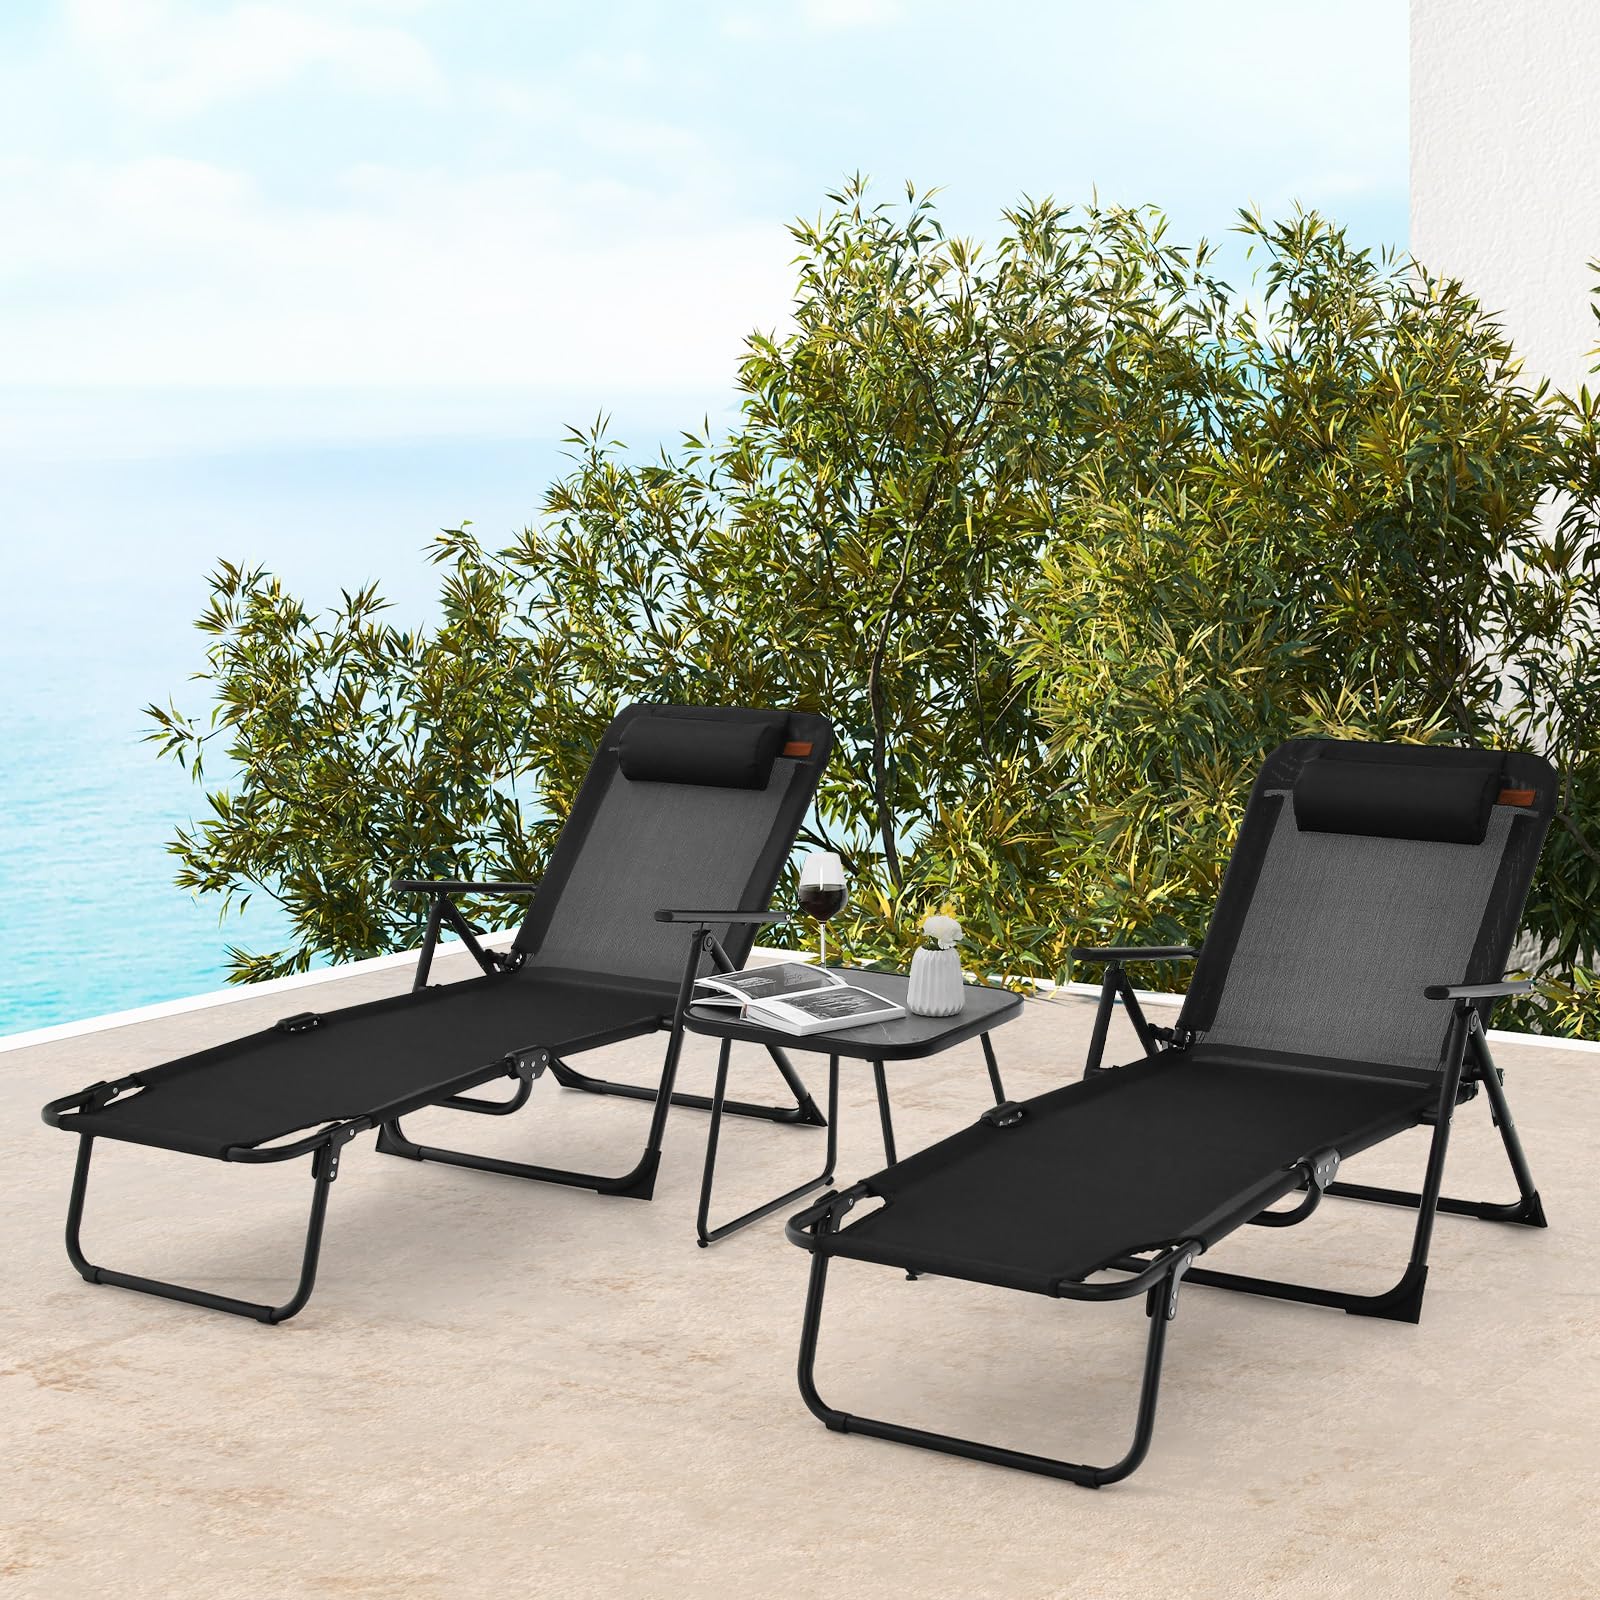 Tangkula 3-Piece Folding Outdoor Chaise Lounge Chair Set, 2 Recliner Chairs & 1 Patio Bistro Table